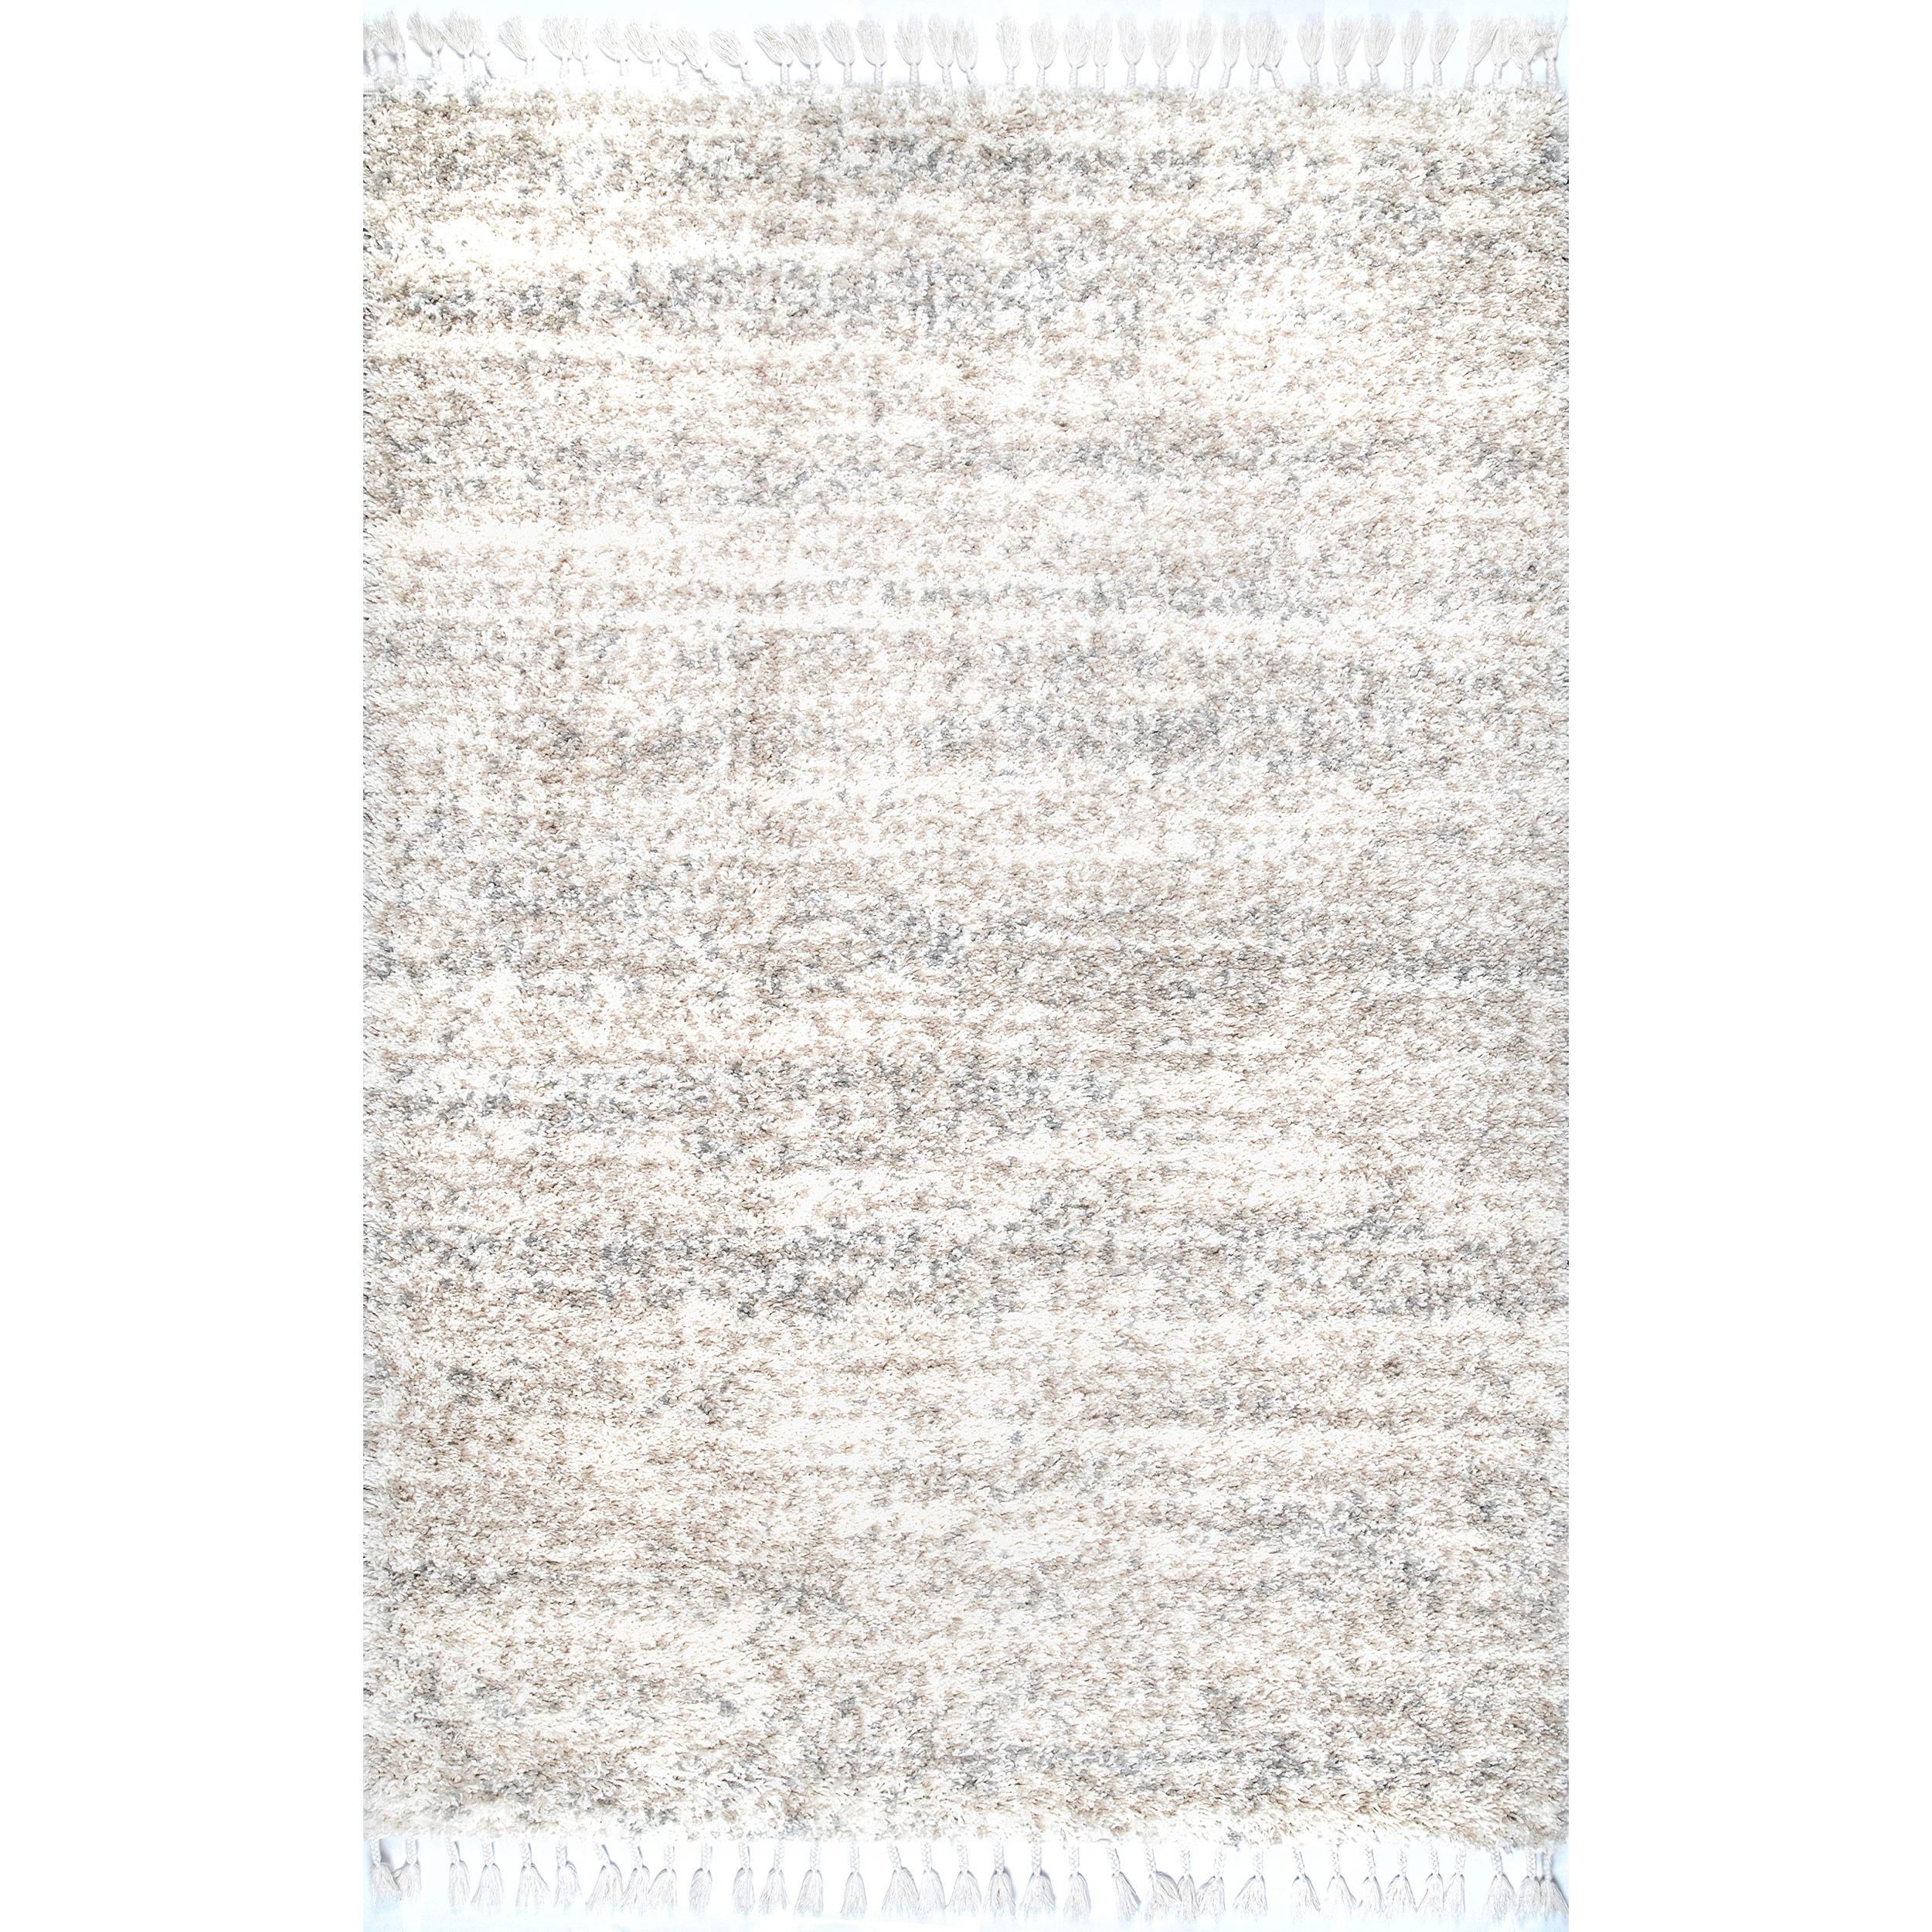 😶 0dM on X: Off White IKEA “Wet Grass” Rug For Sale #offwhite